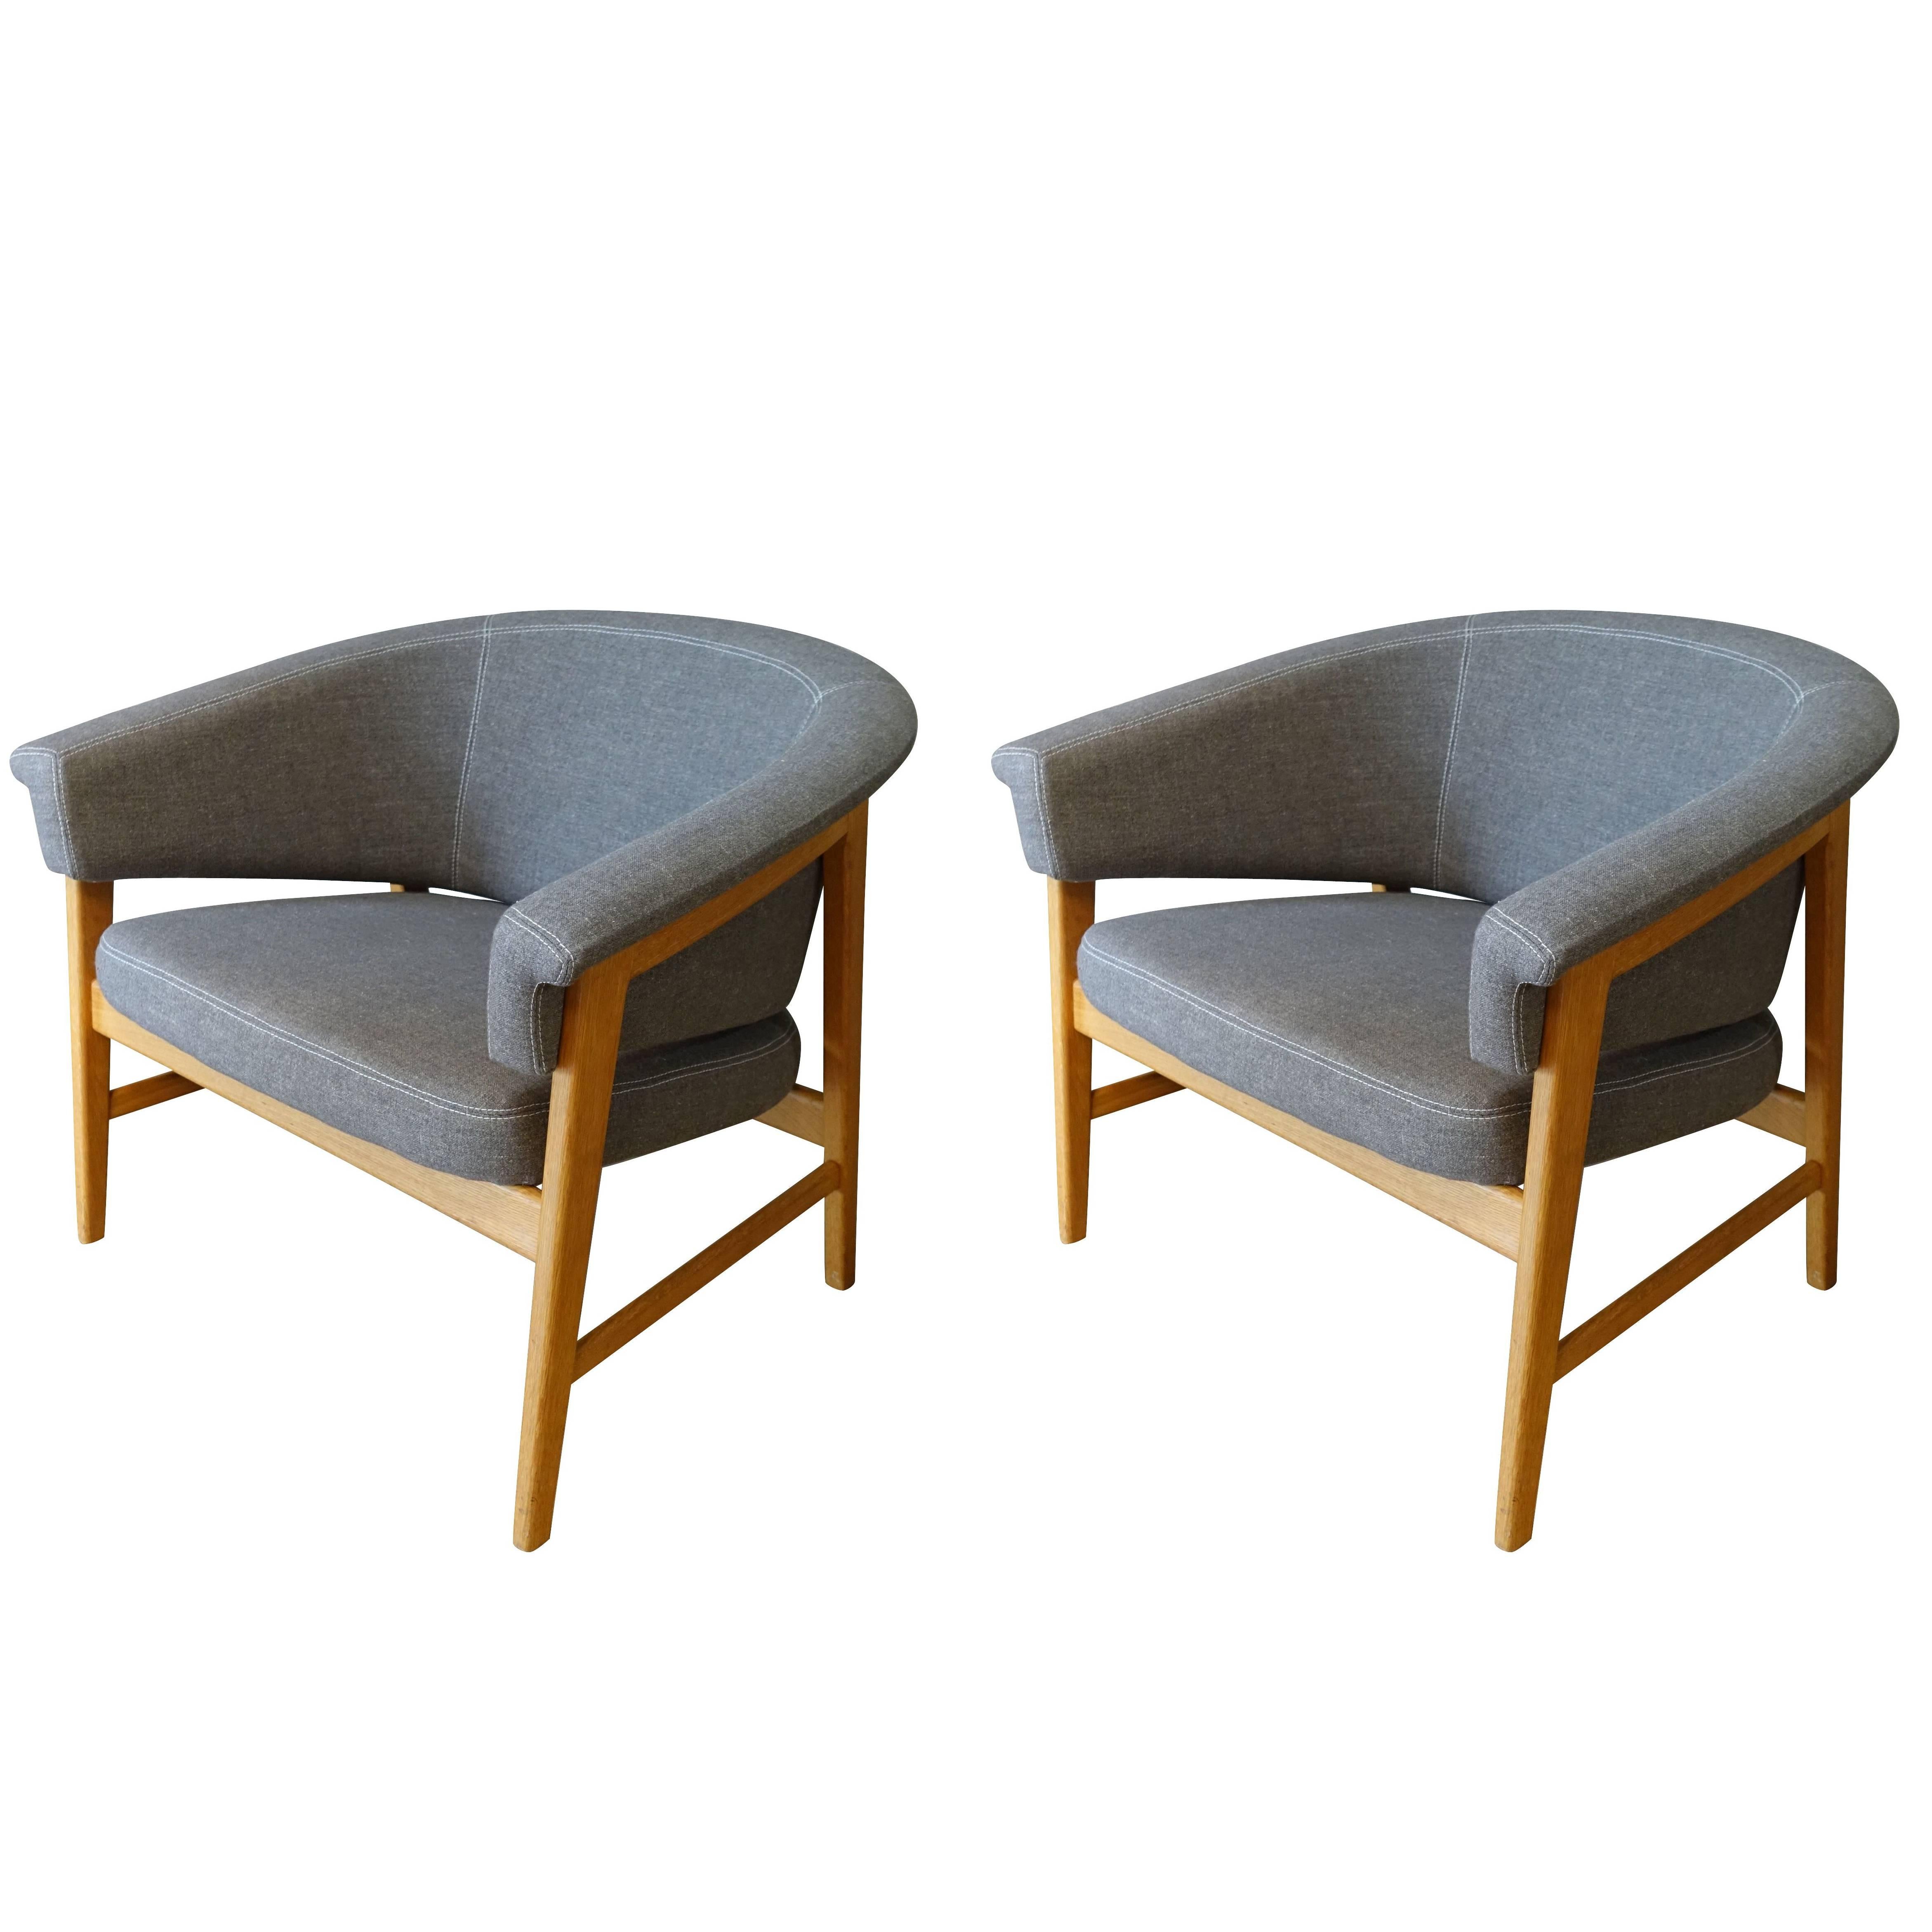 Swedish Upholstered Pair of Side Chairs, Mid-Century